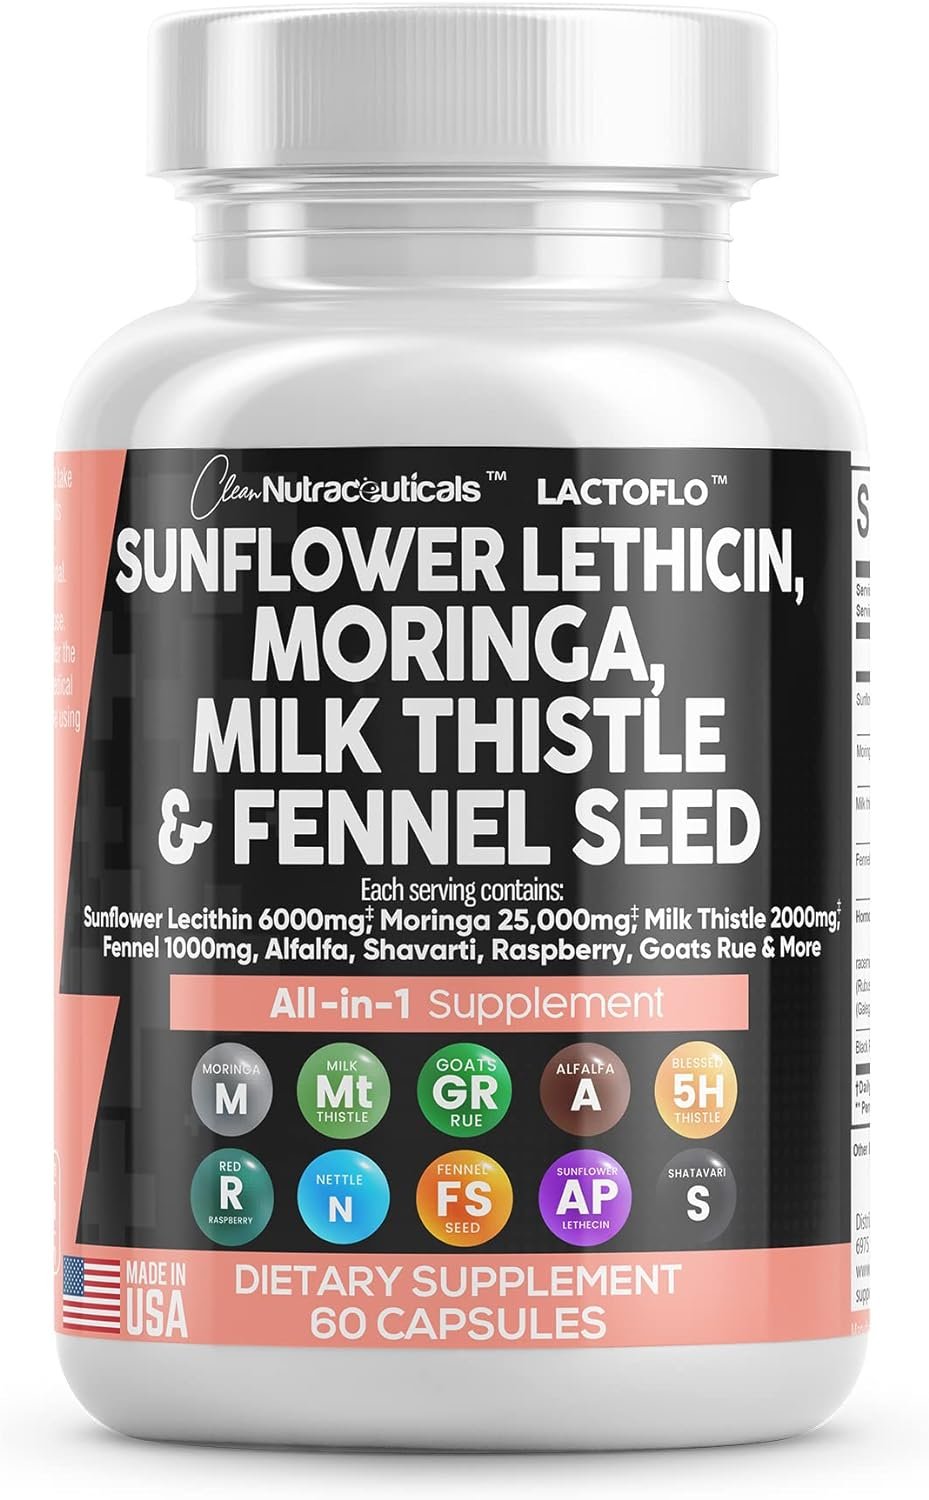 Clean Nutraceuticals Sunflower Lecithin 6000mg Lactation Supplement Review